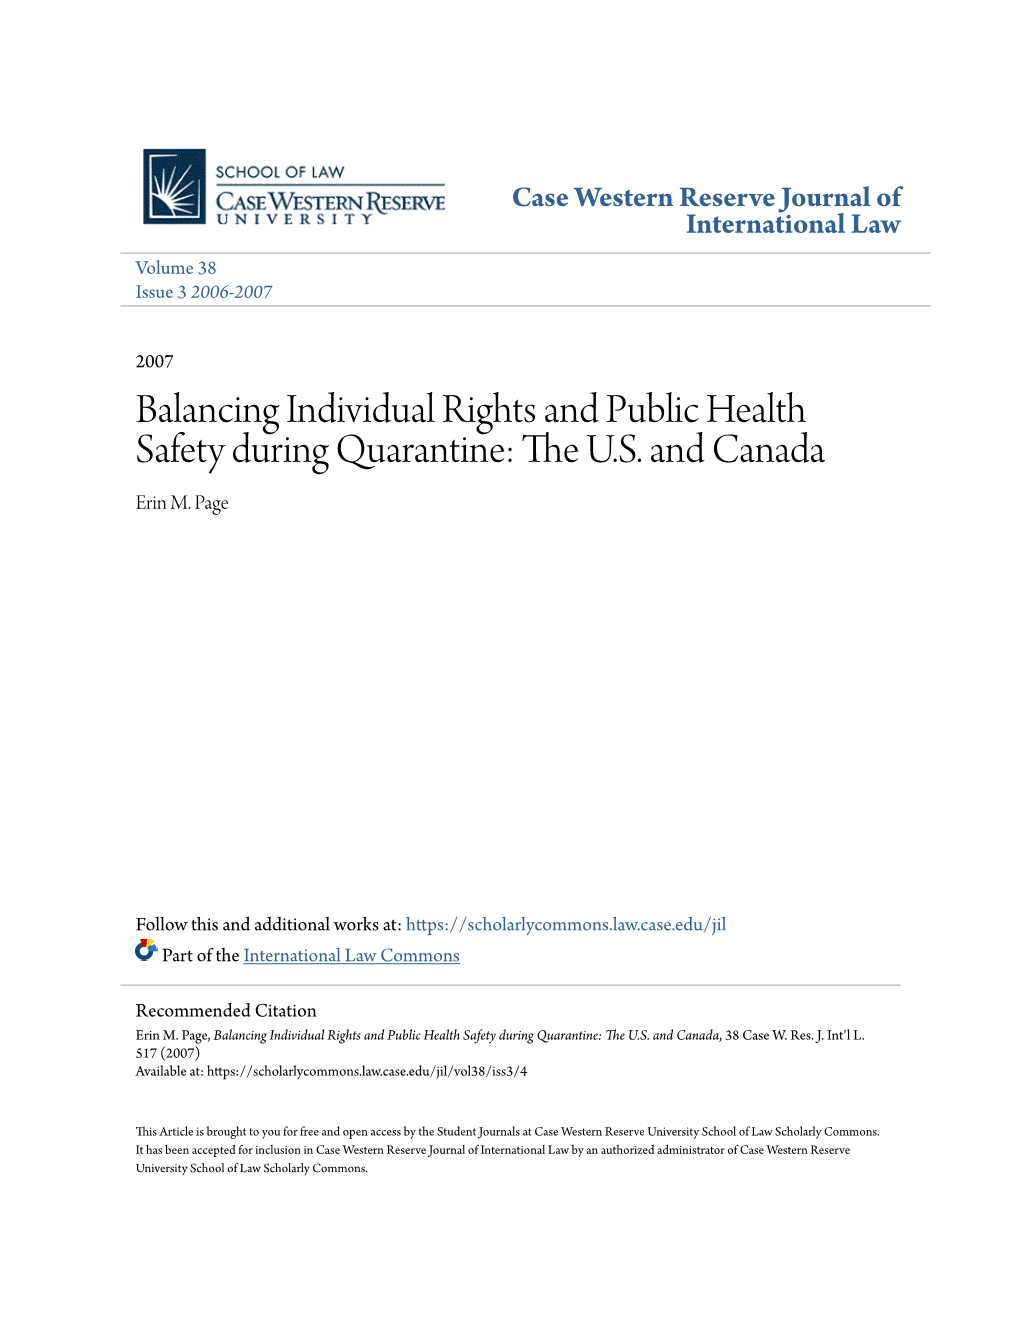 Balancing Individual Rights and Public Health Safety During Quarantine: the .SU